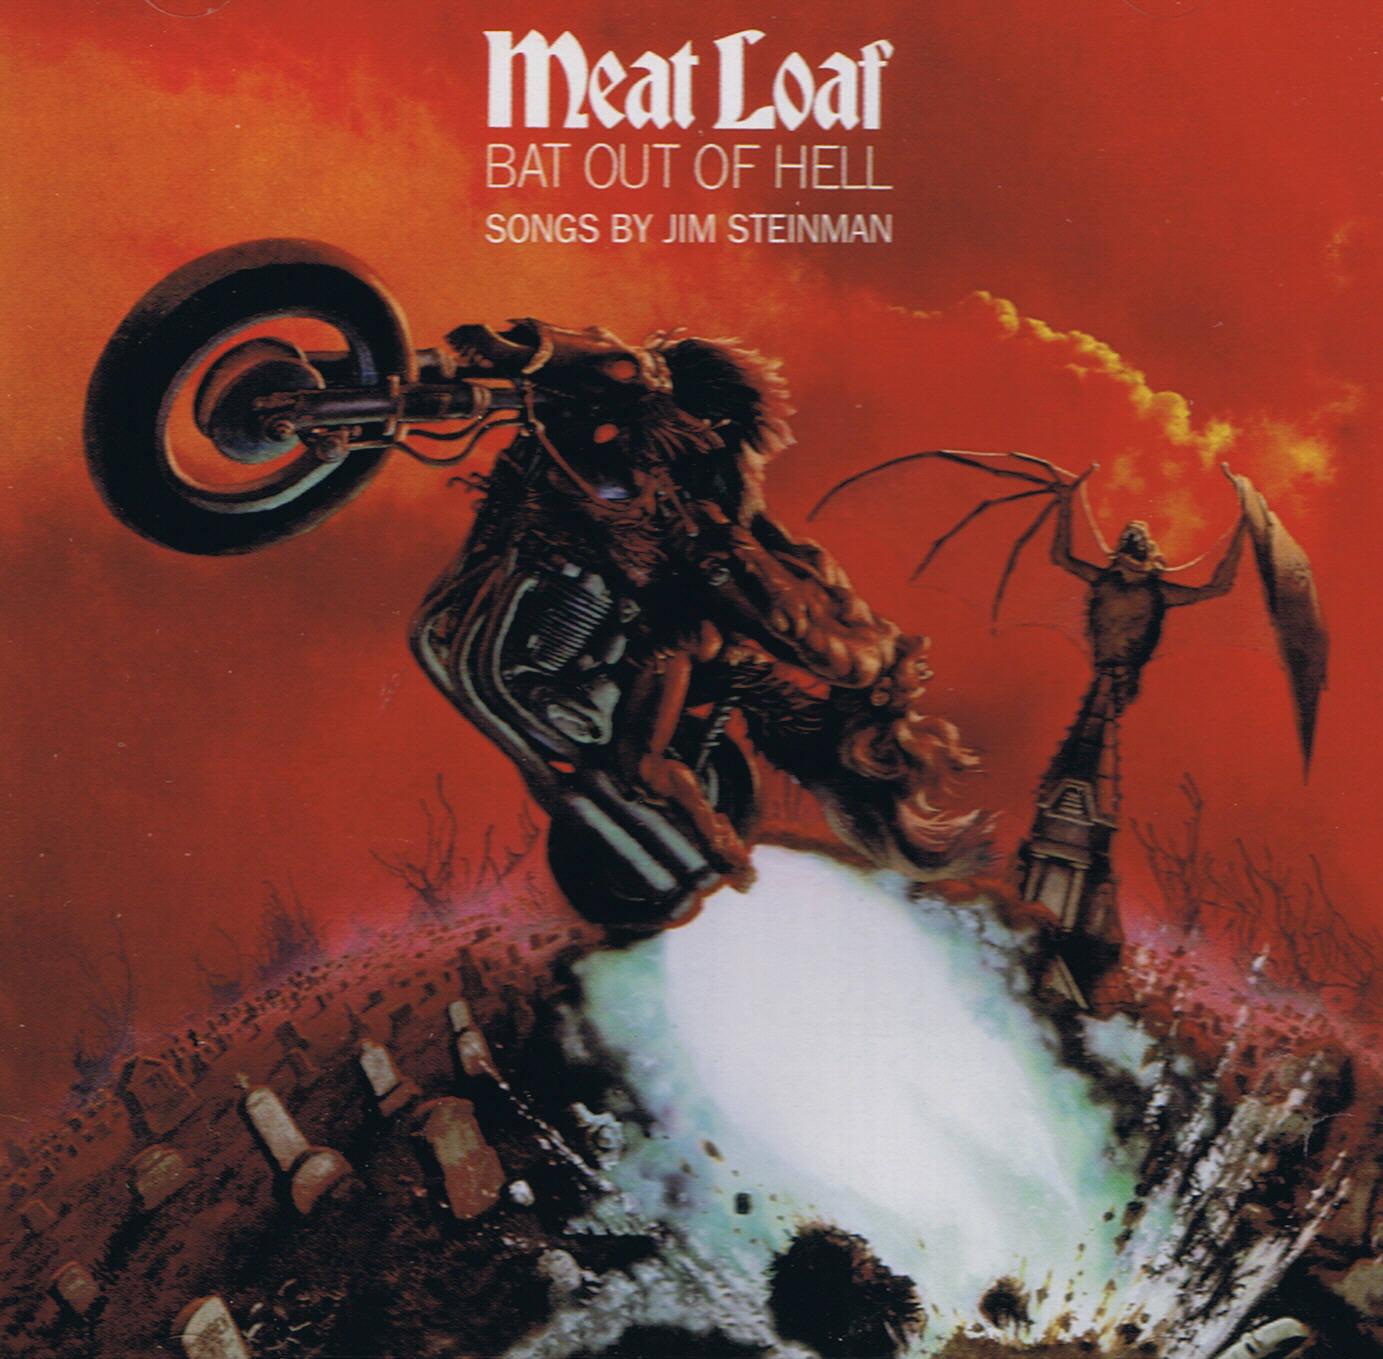 Richard Corben . Meat Loaf . Bat out of hell . 1977